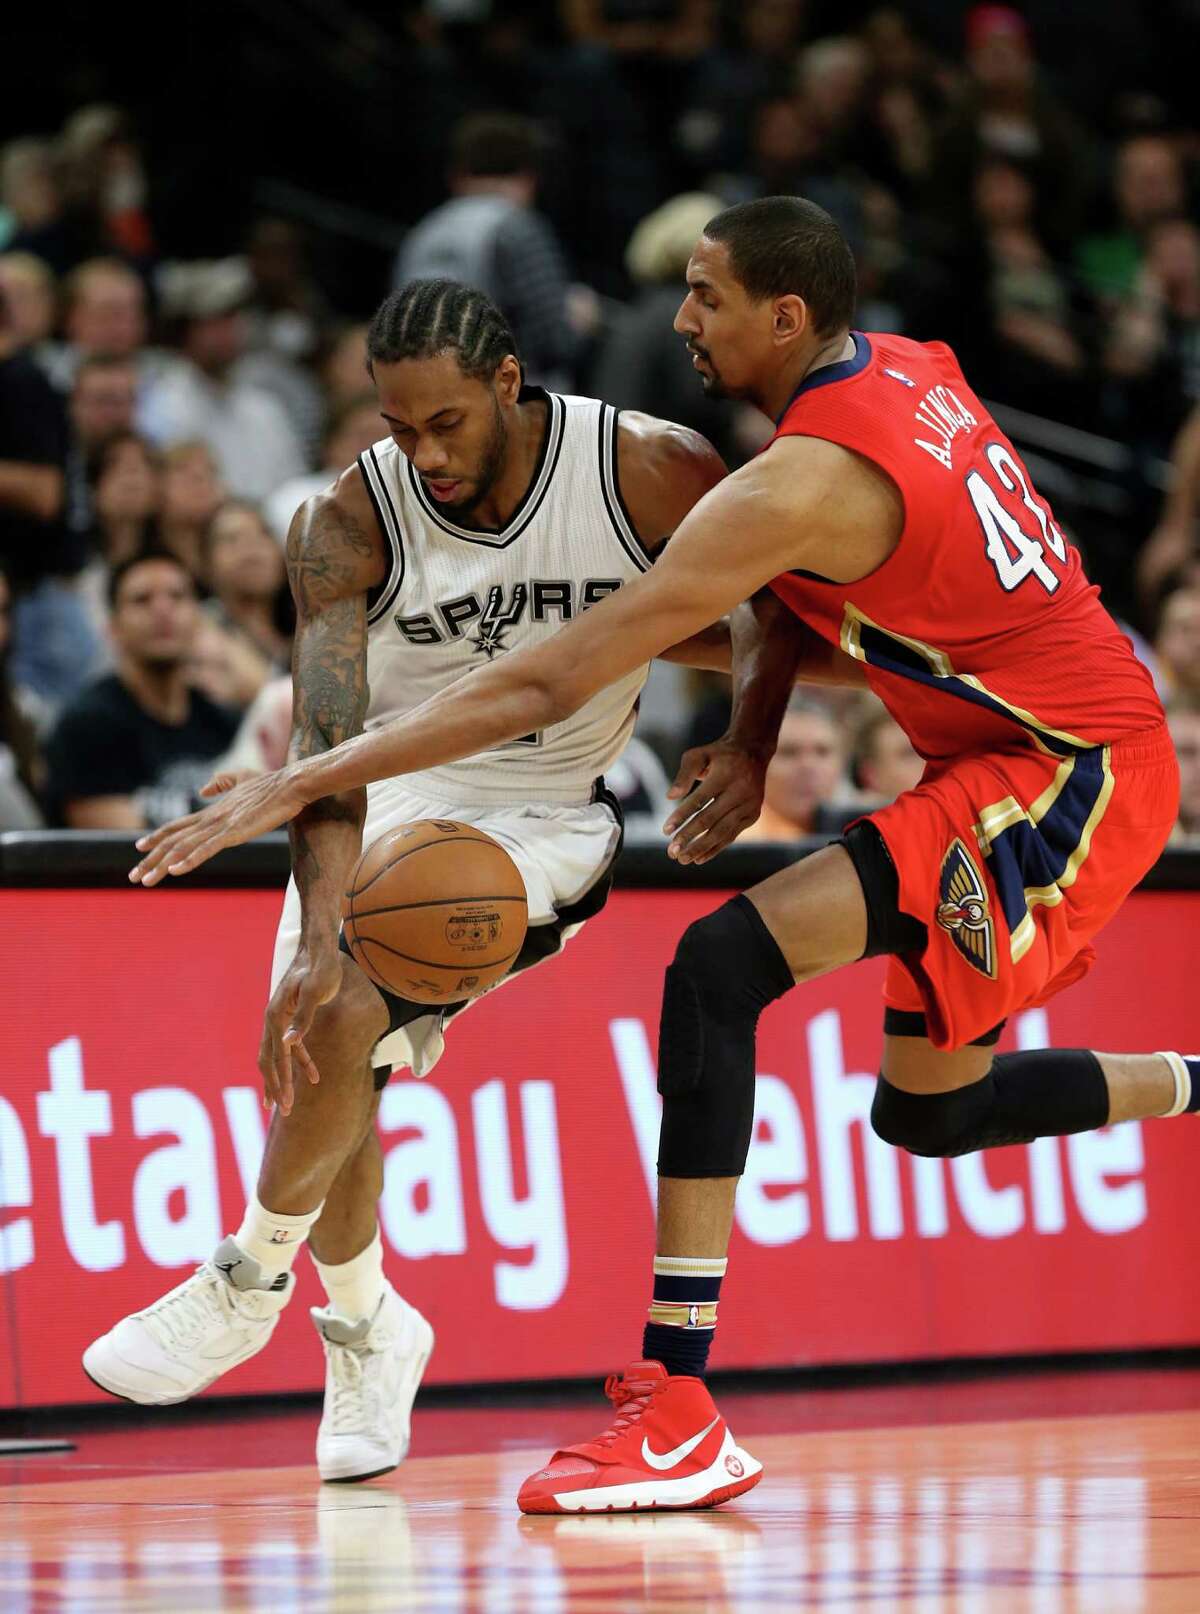 San Antonio Spurs' Kawhi Leonard steal the ball from New Orleans Pelicans' Alexis Ajinca during the first half at the AT&T Center, Wednesday, March 30, 2016.